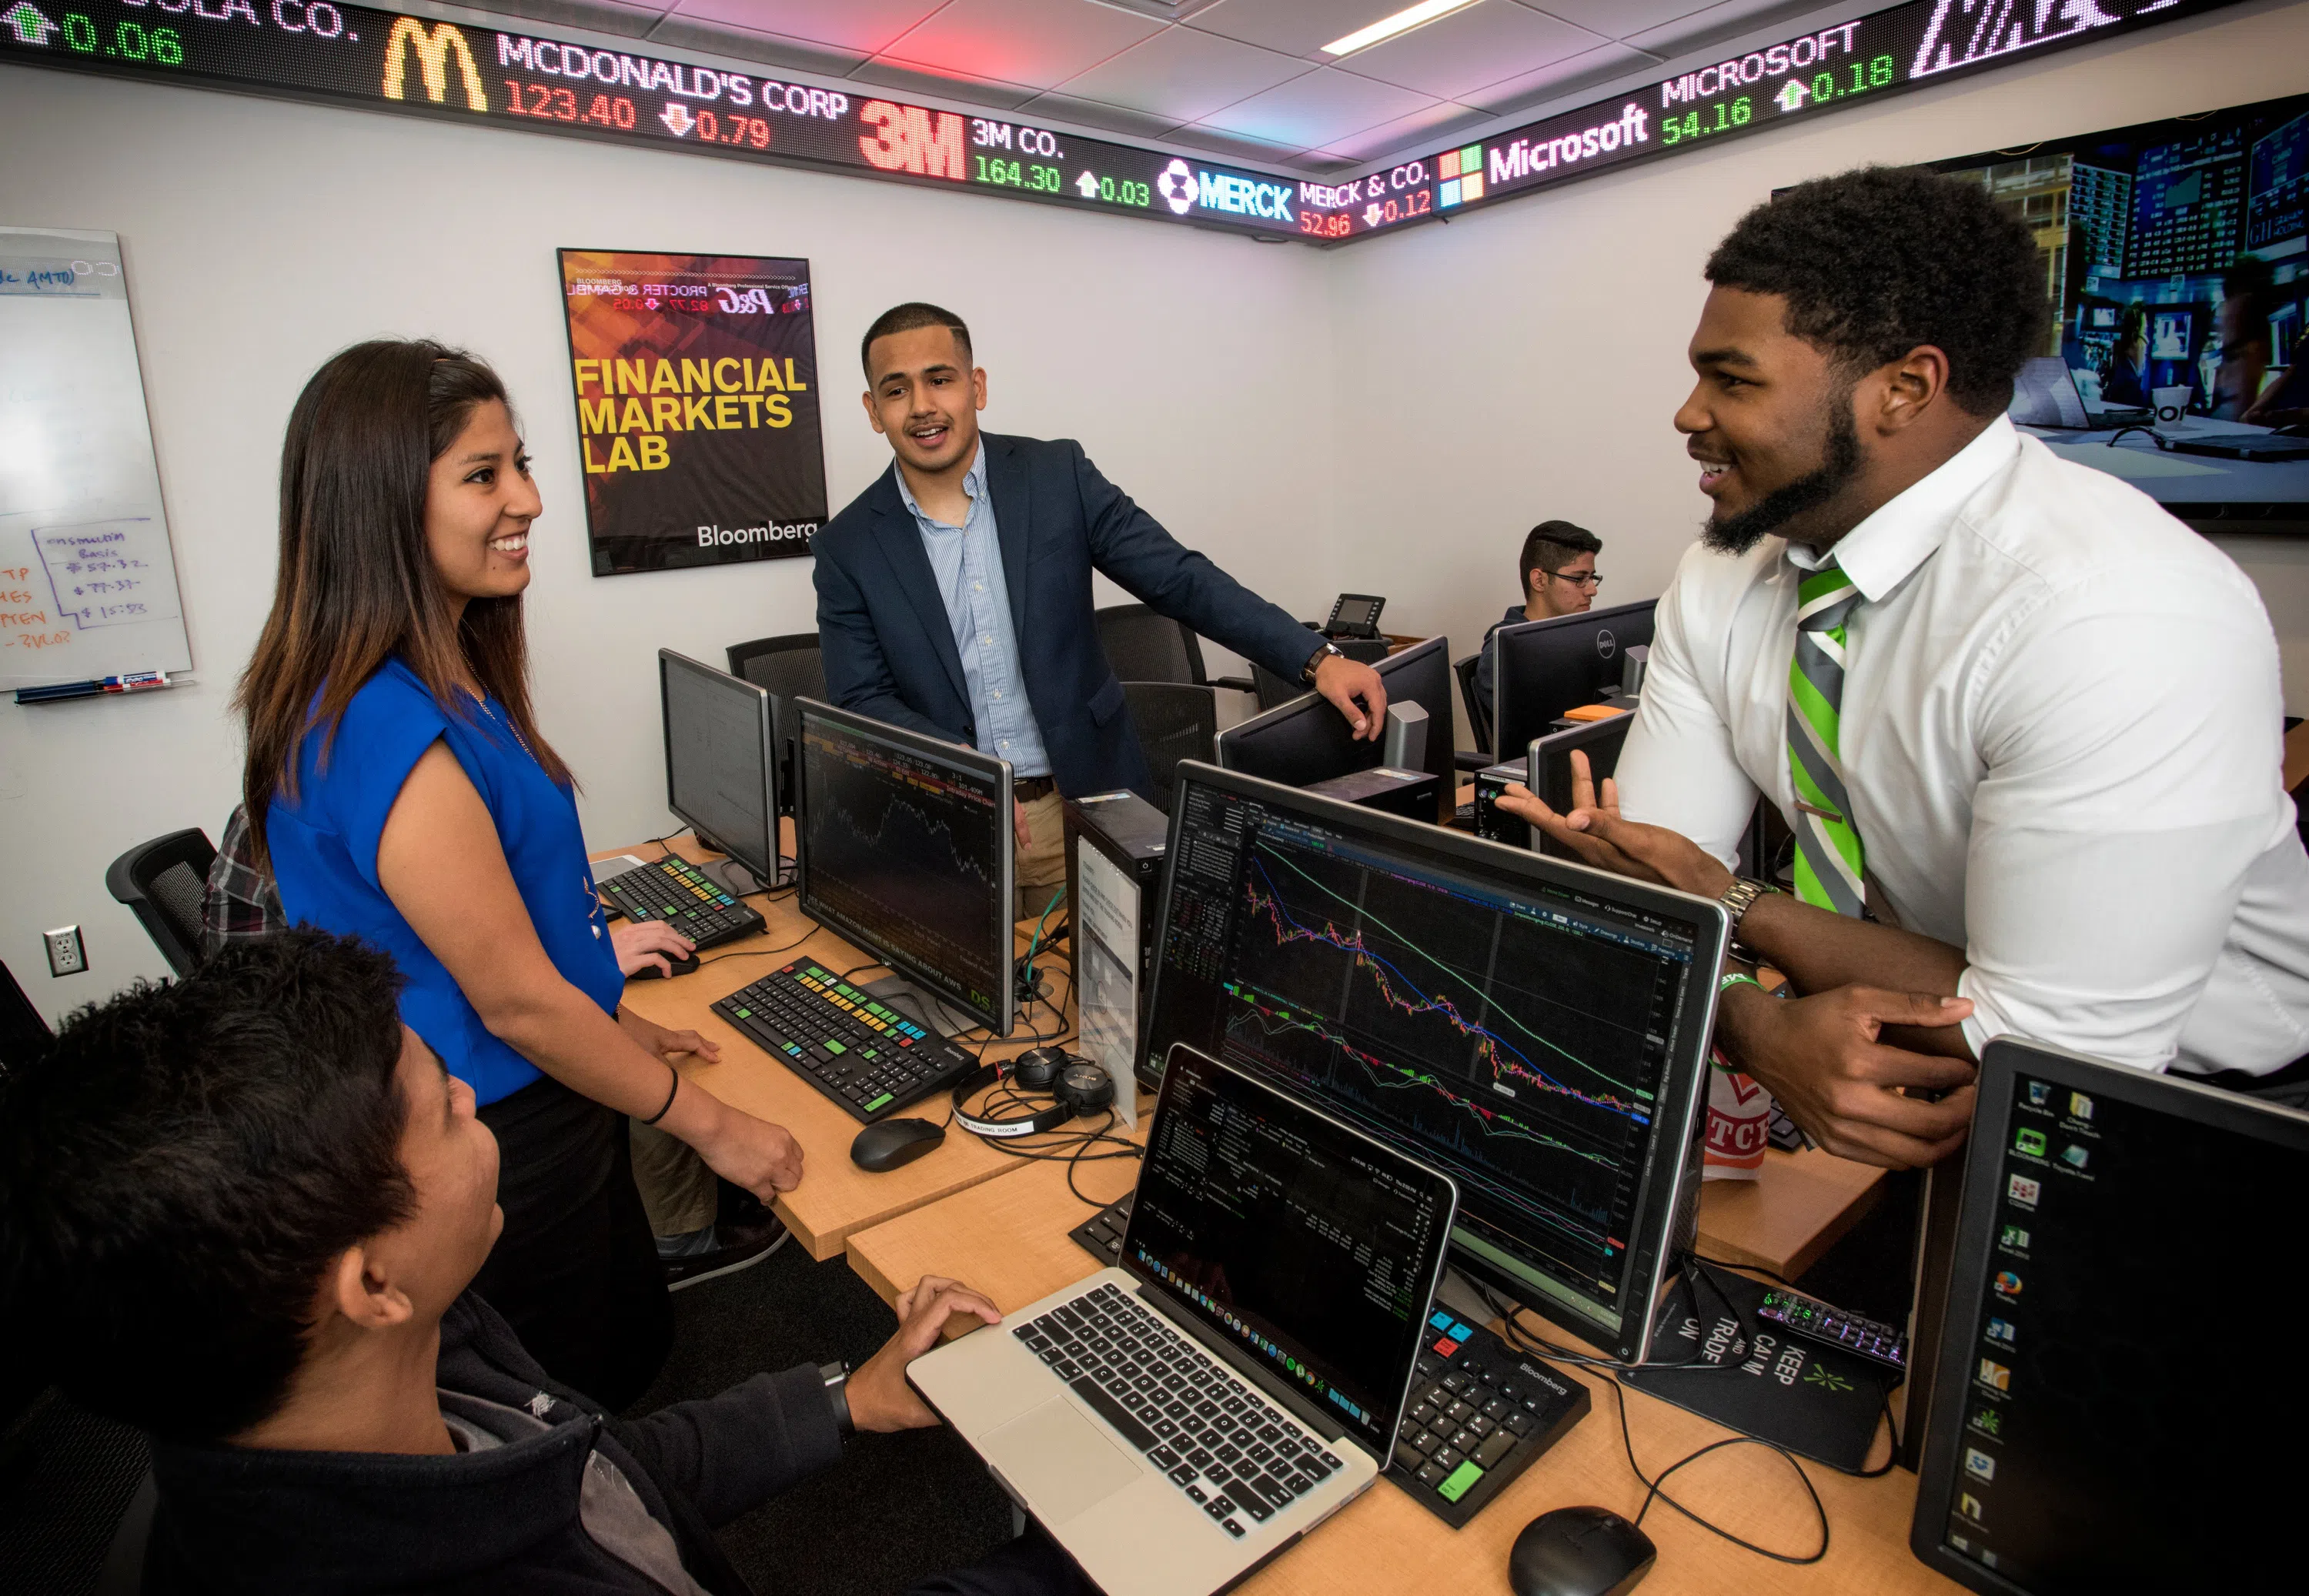 Students gather around computers displaying stock information. Stock ticker runs around the top of the room, displaying different stocks' performance